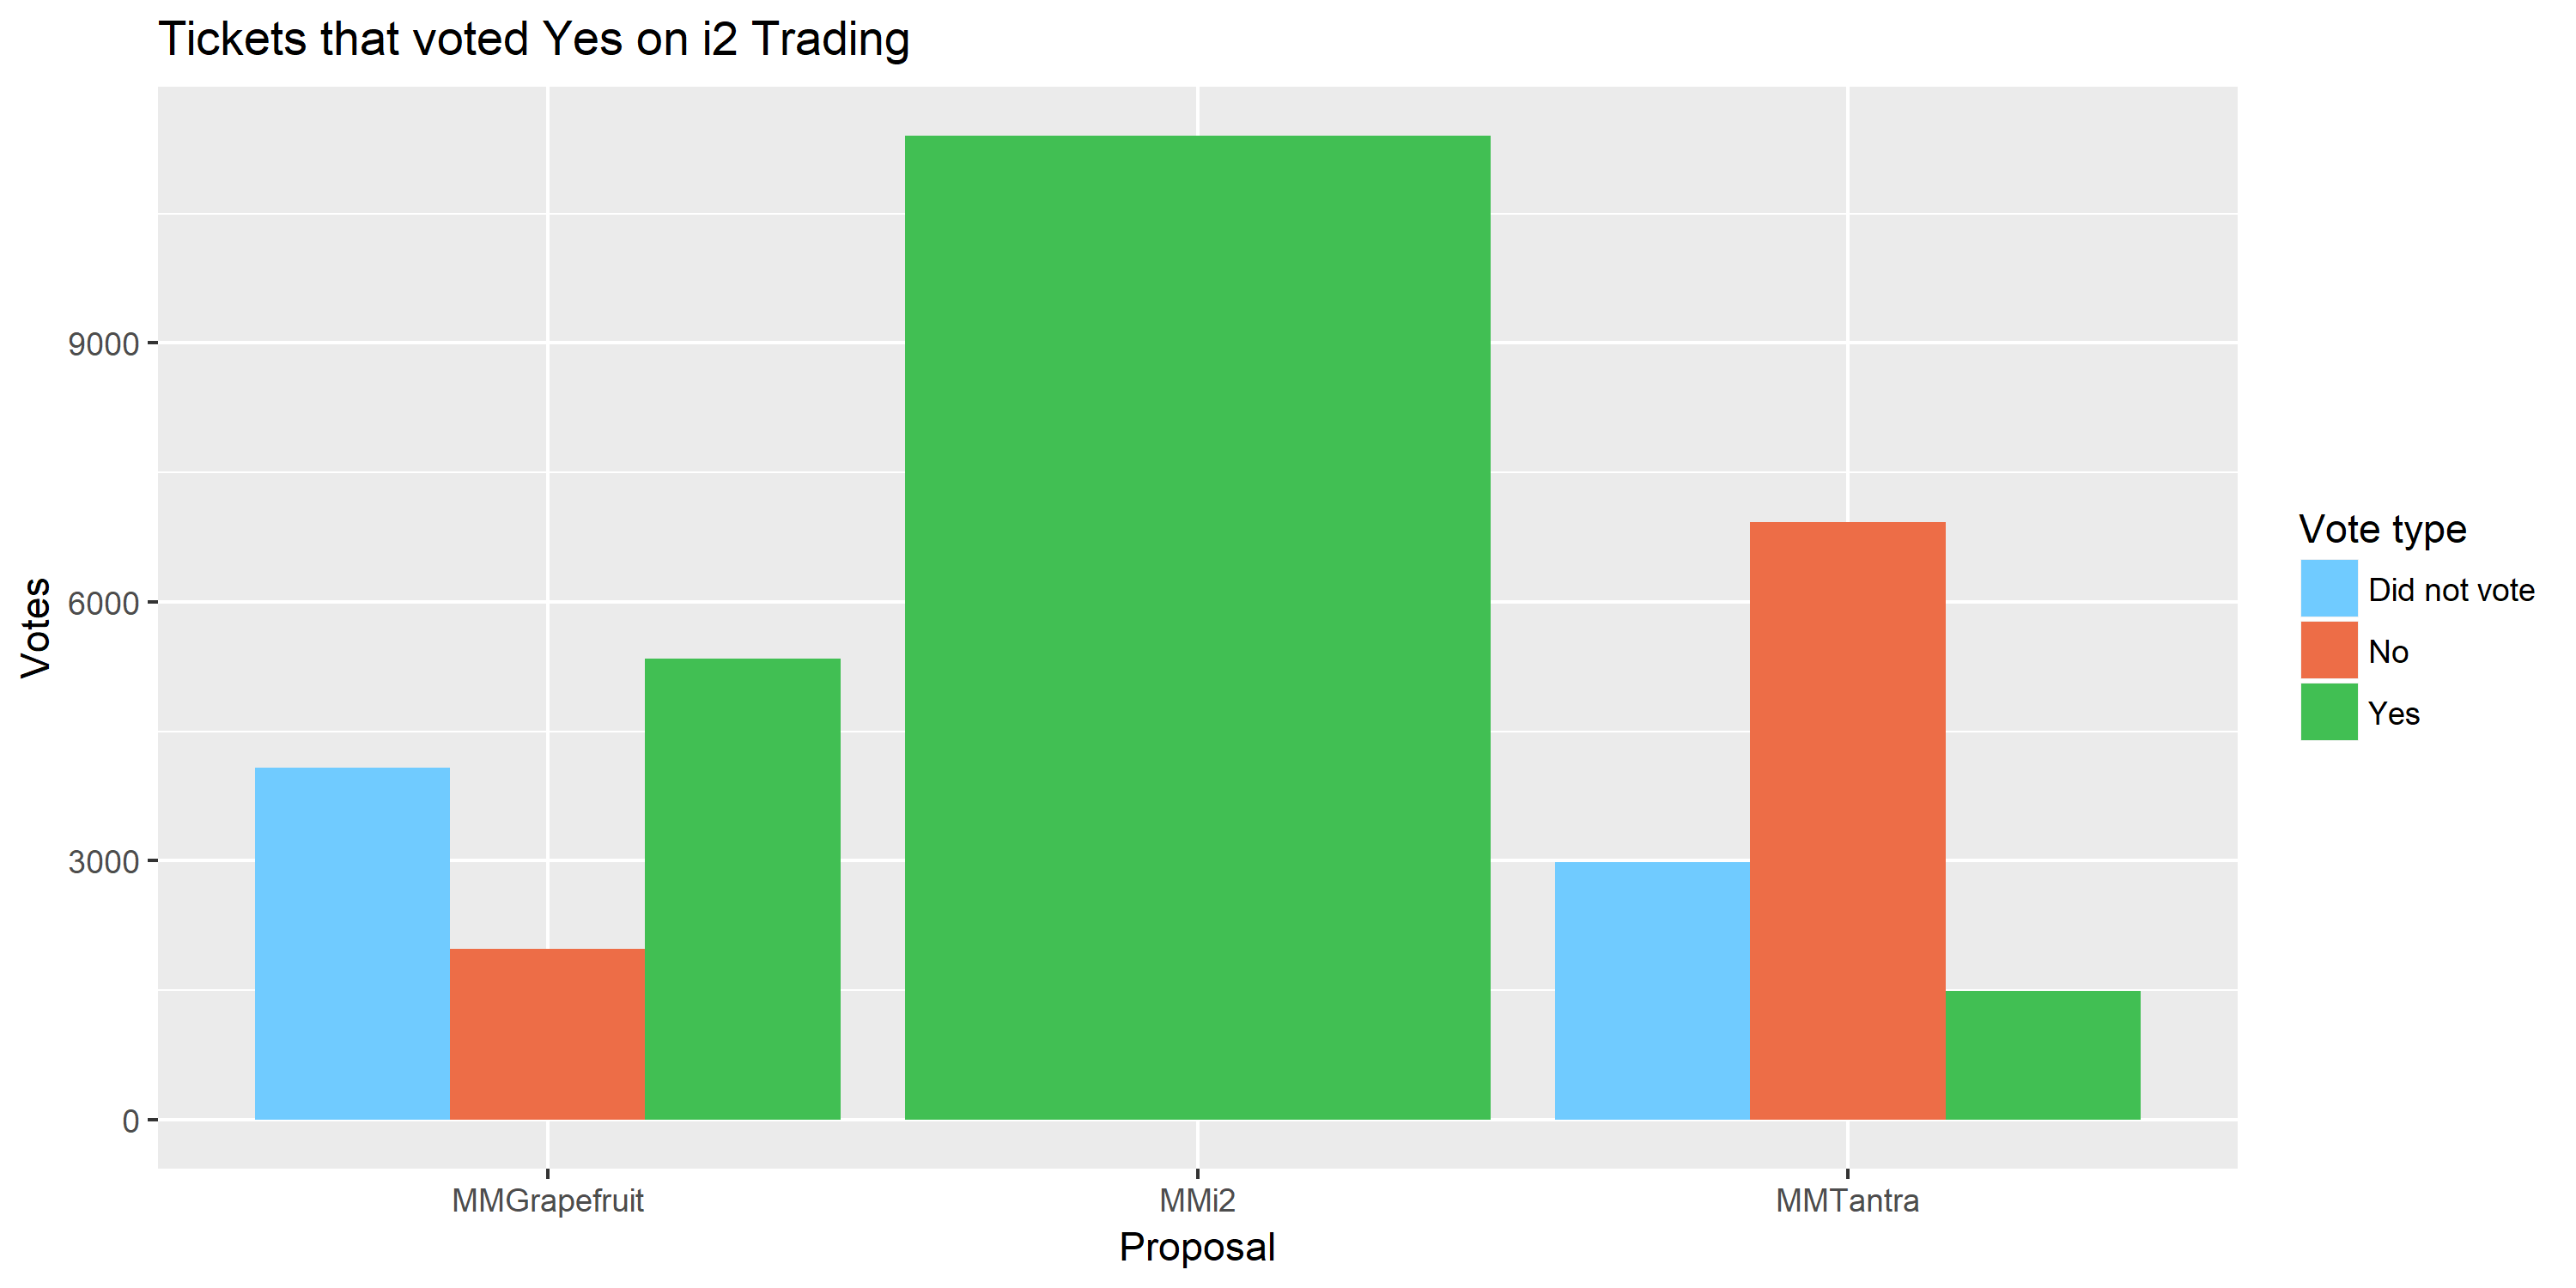 Tickets that voted Yes on i2 Trading